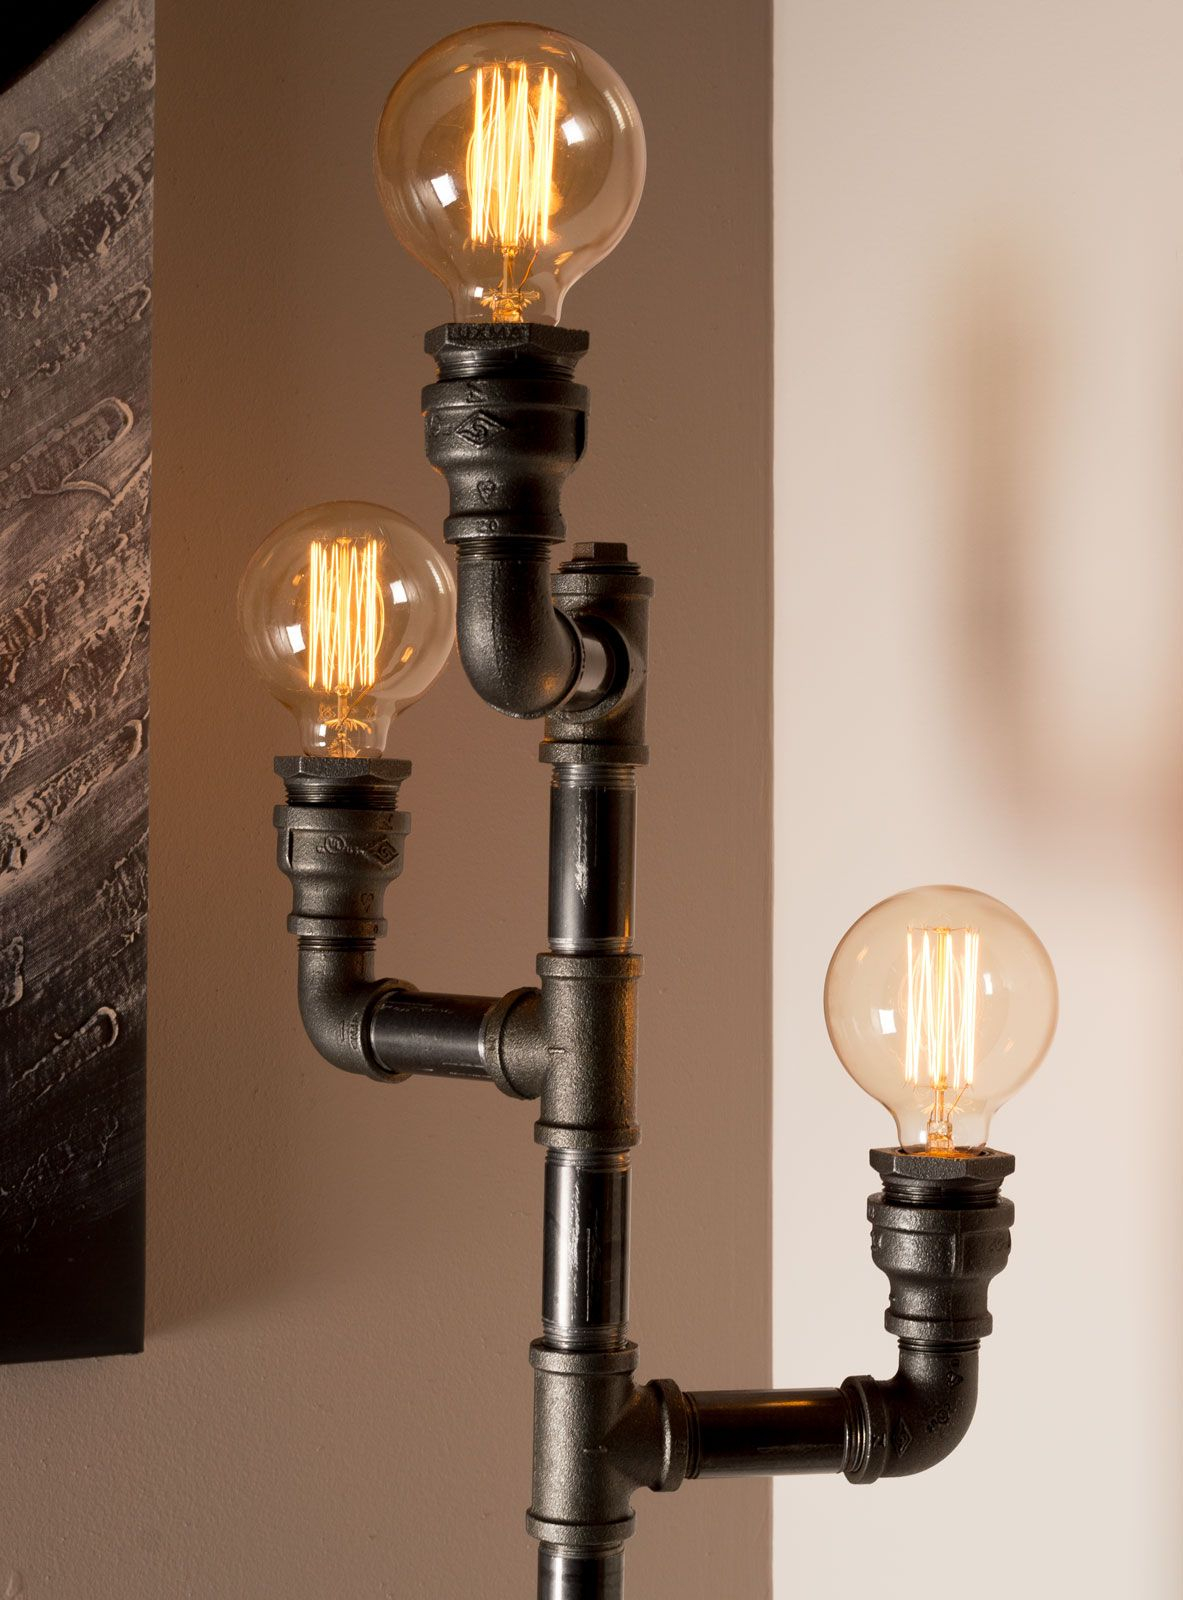 Steampunk Design Home Floor Lamps Perfect Lamp For Your regarding sizing 1183 X 1600